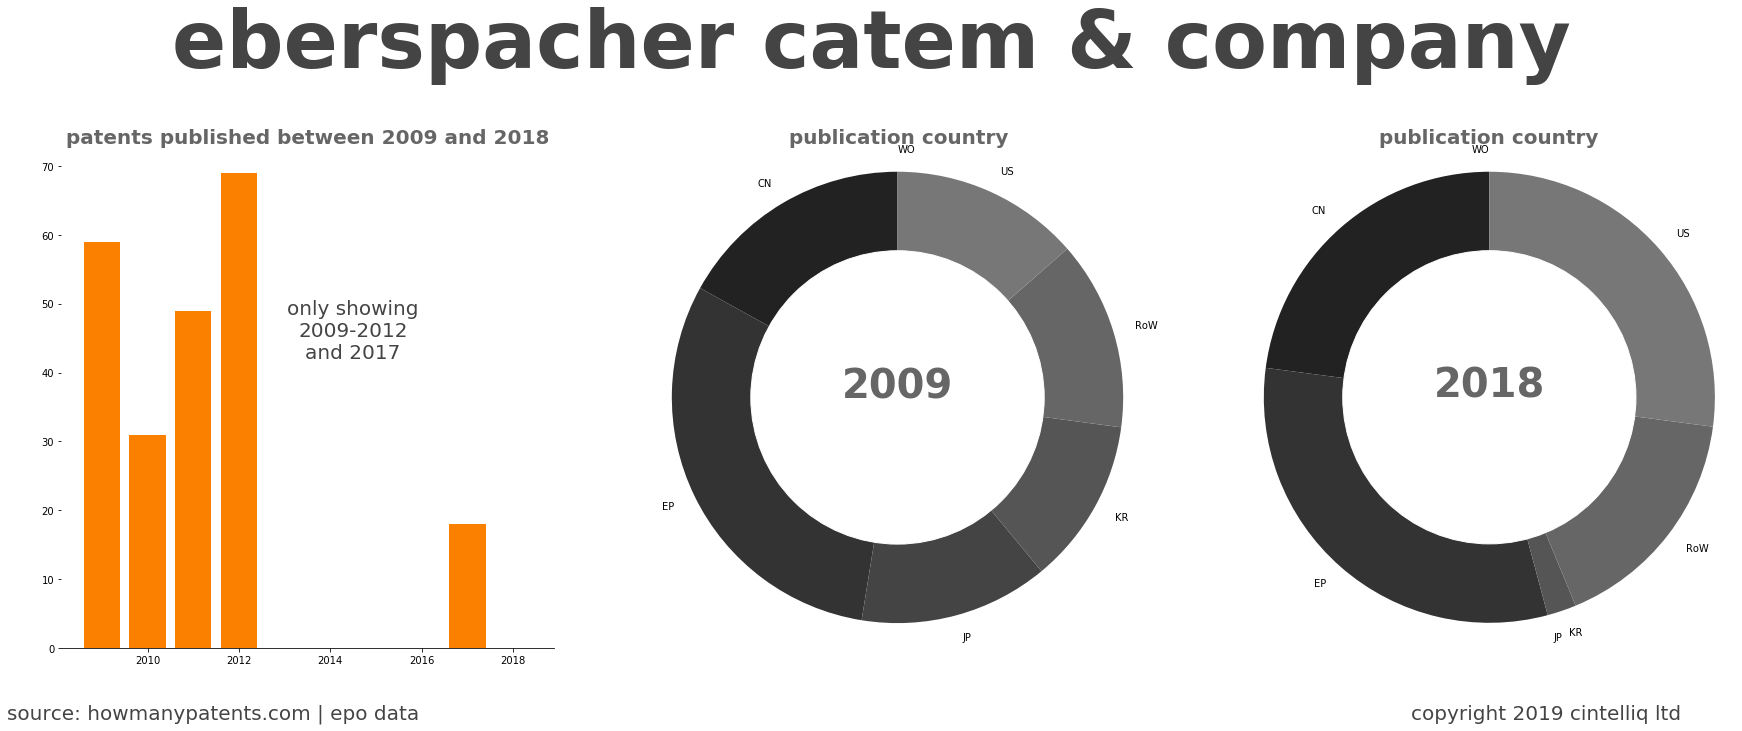 summary of patents for Eberspacher Catem & Company